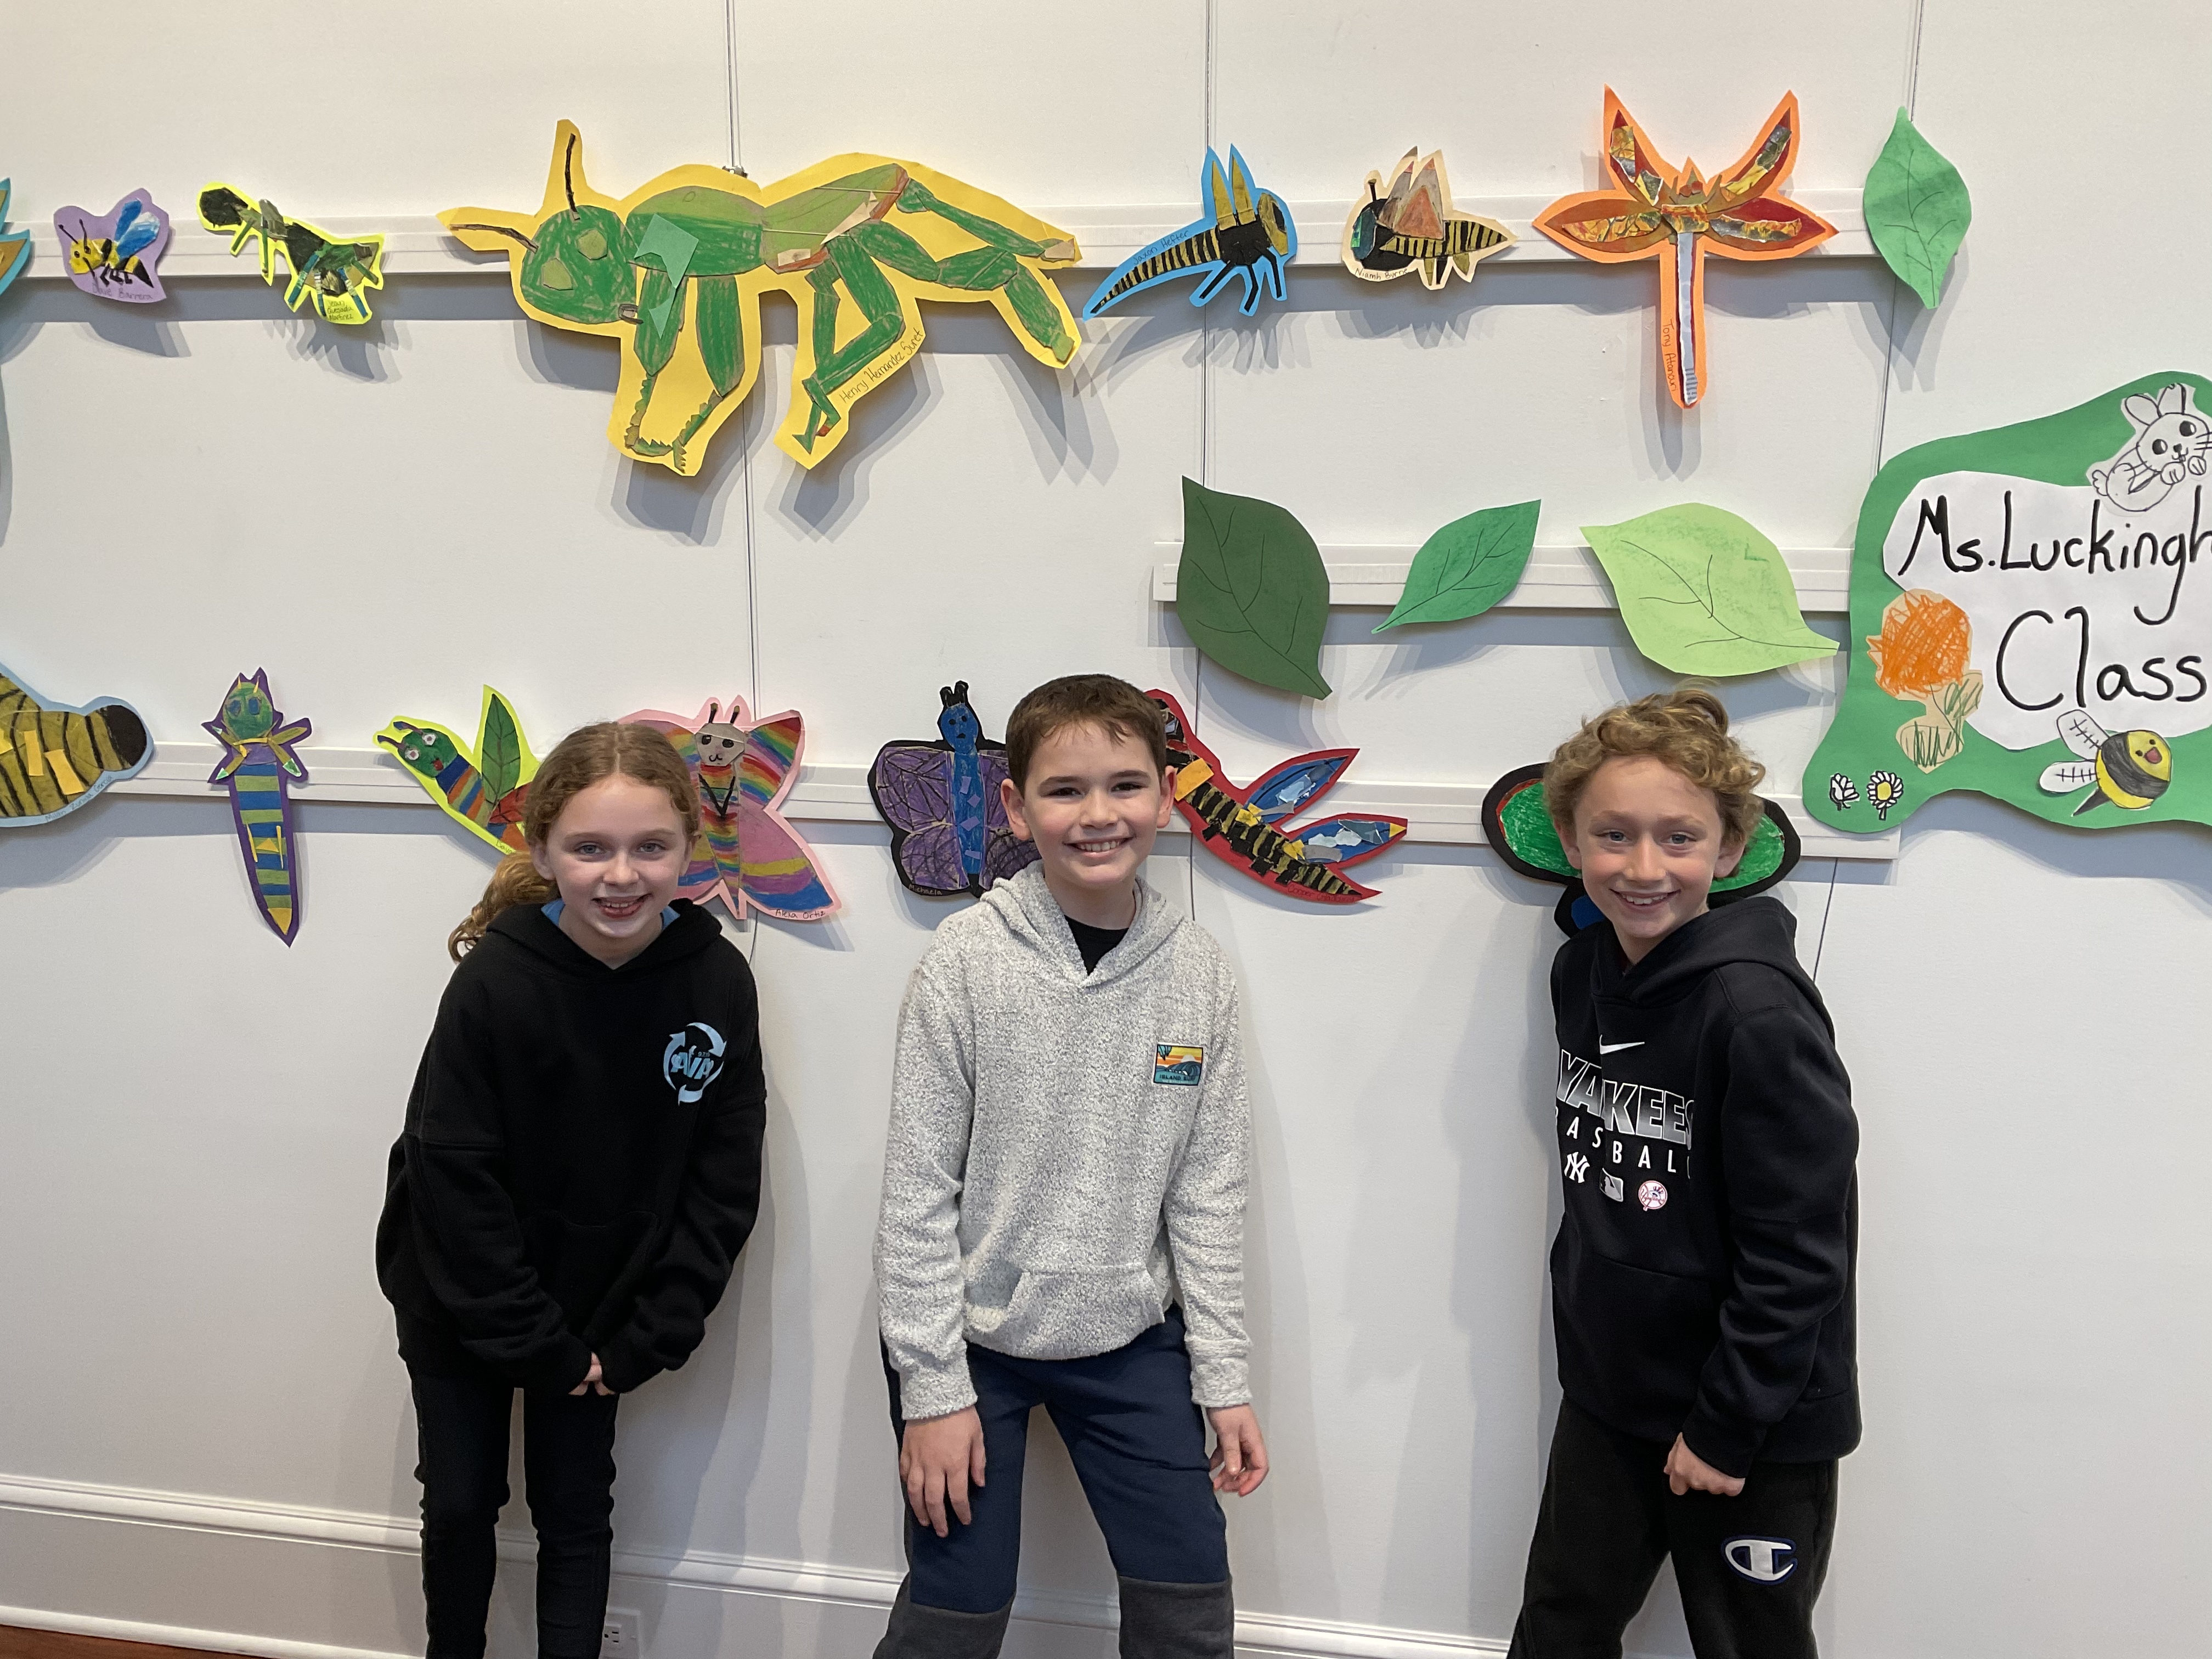 Third graders from Ms. Luckingham’s class at East Quogue School with their artwork that is hanging in the Quogue Library Gallery. Art teacher Ms. Rosenberg had students create artistic renderings of insects. COURTESY EAST QUOGUE SCHOOL